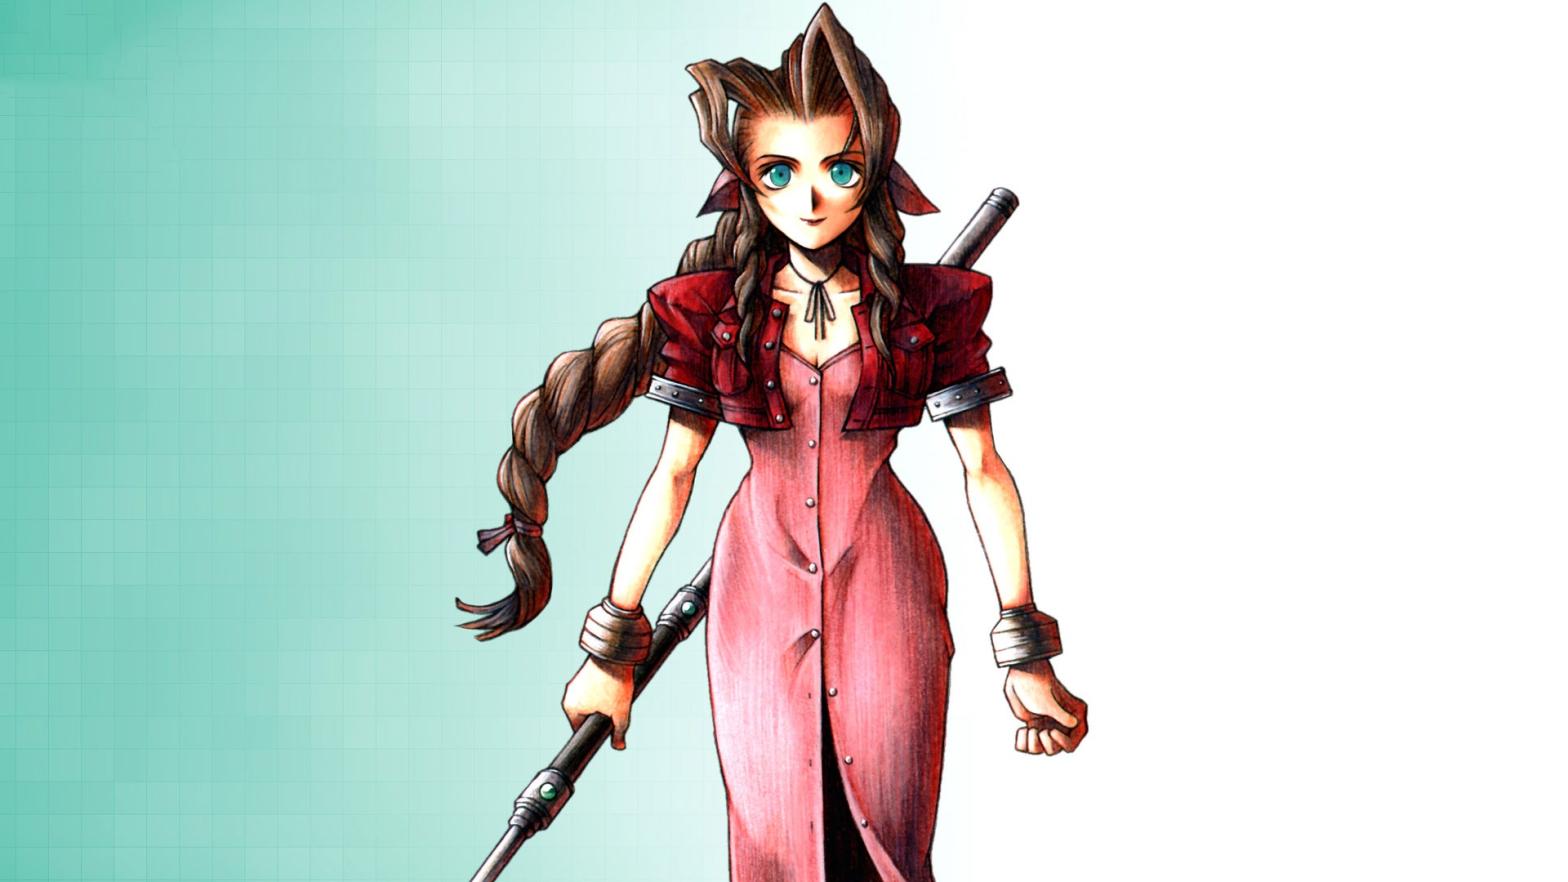 Is This Aerith’s Ghost In The Original Final Fantasy VII?